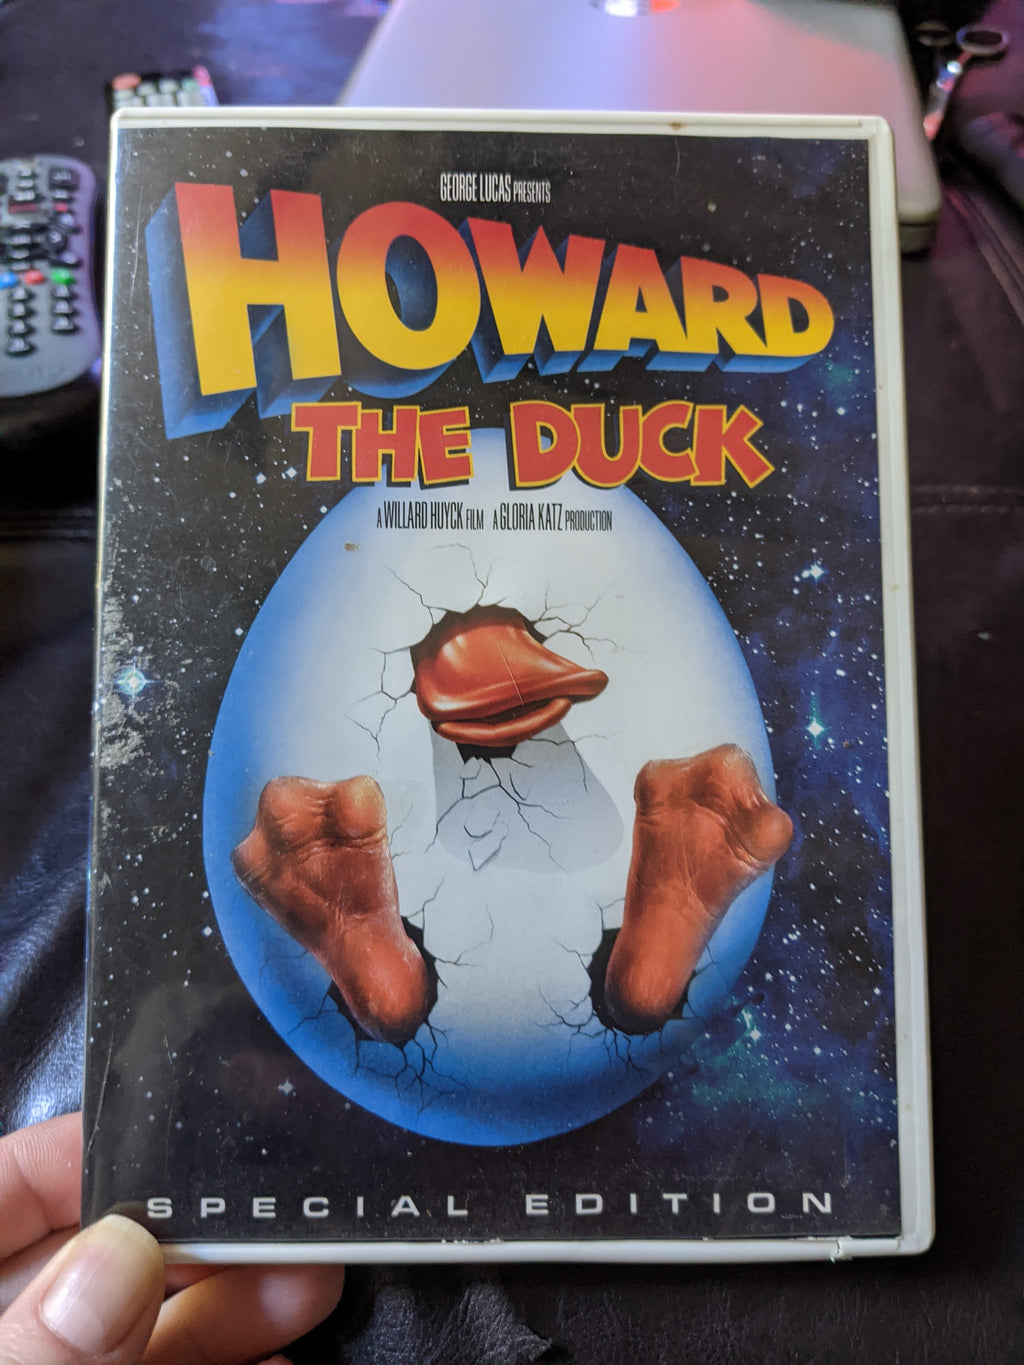 Howard The Duck Special Edition DVD - George Lucas - Marvel Comics Movie